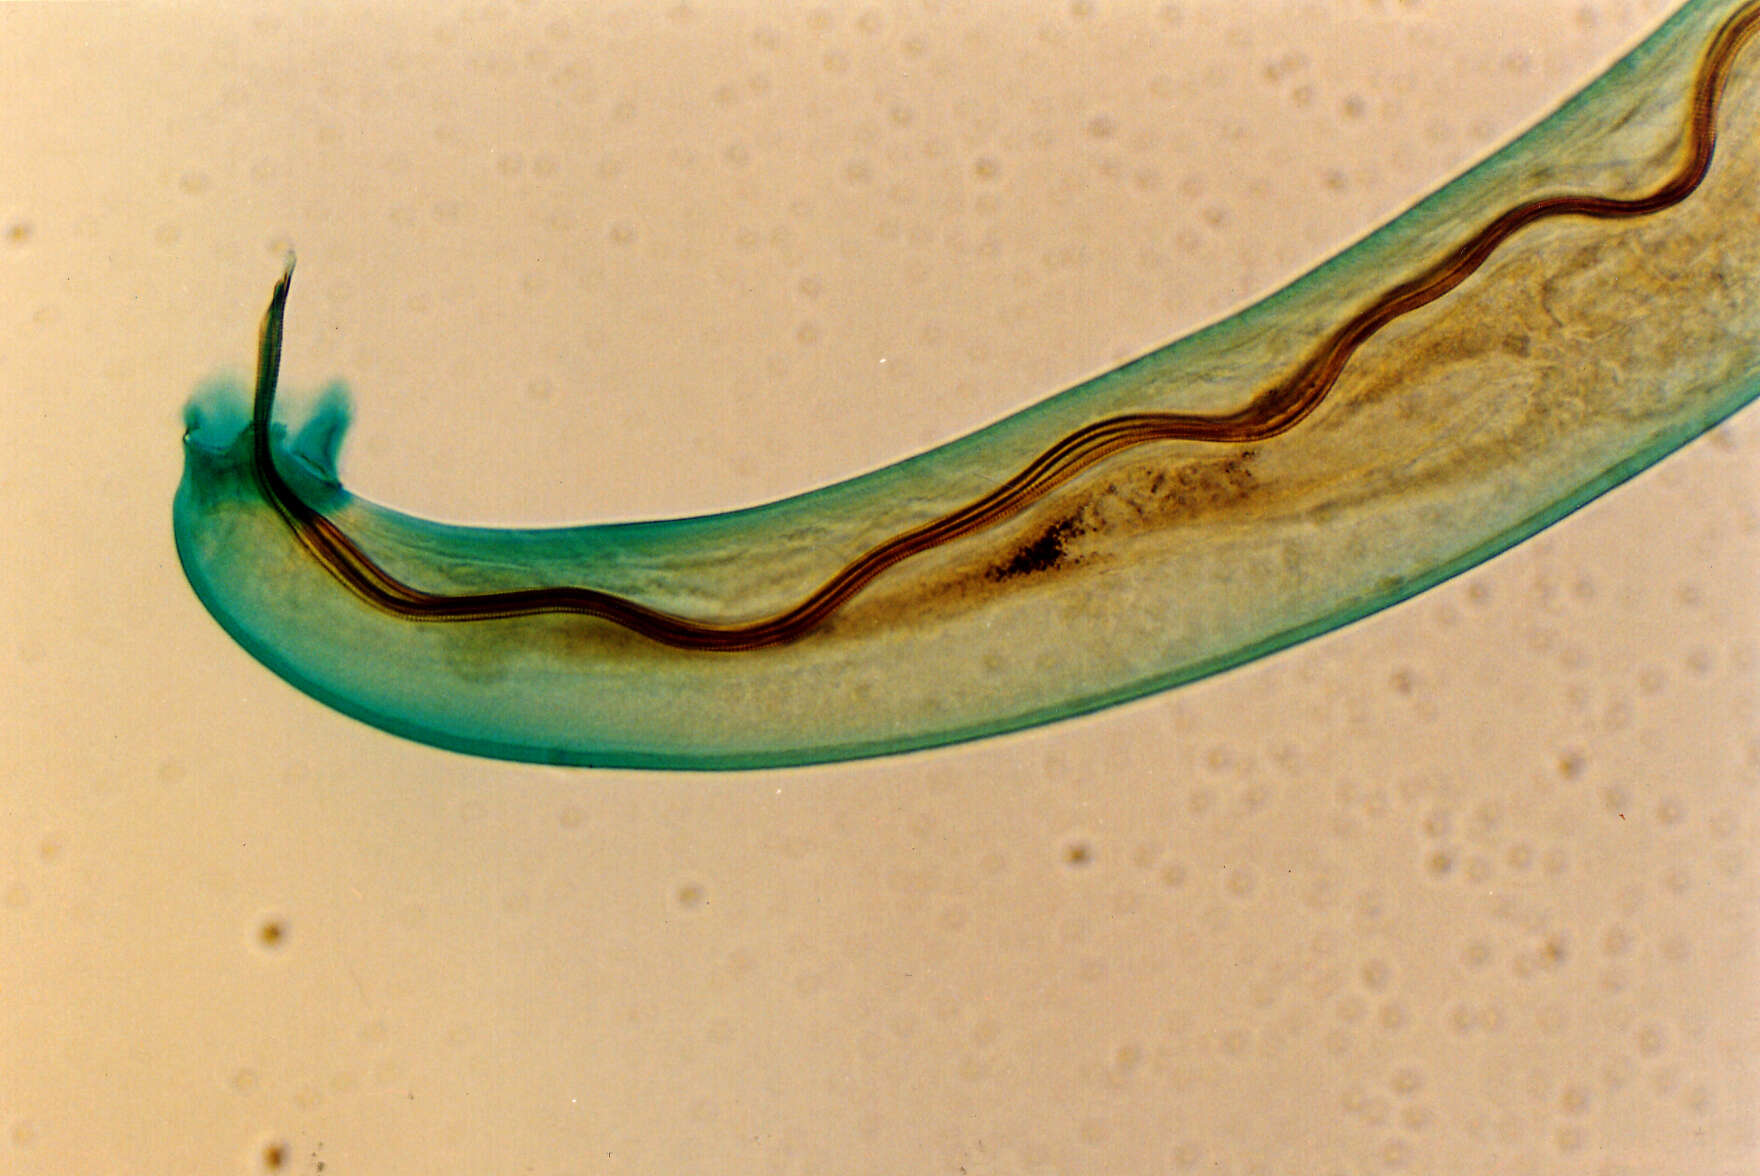 Image of Angiostrongylus